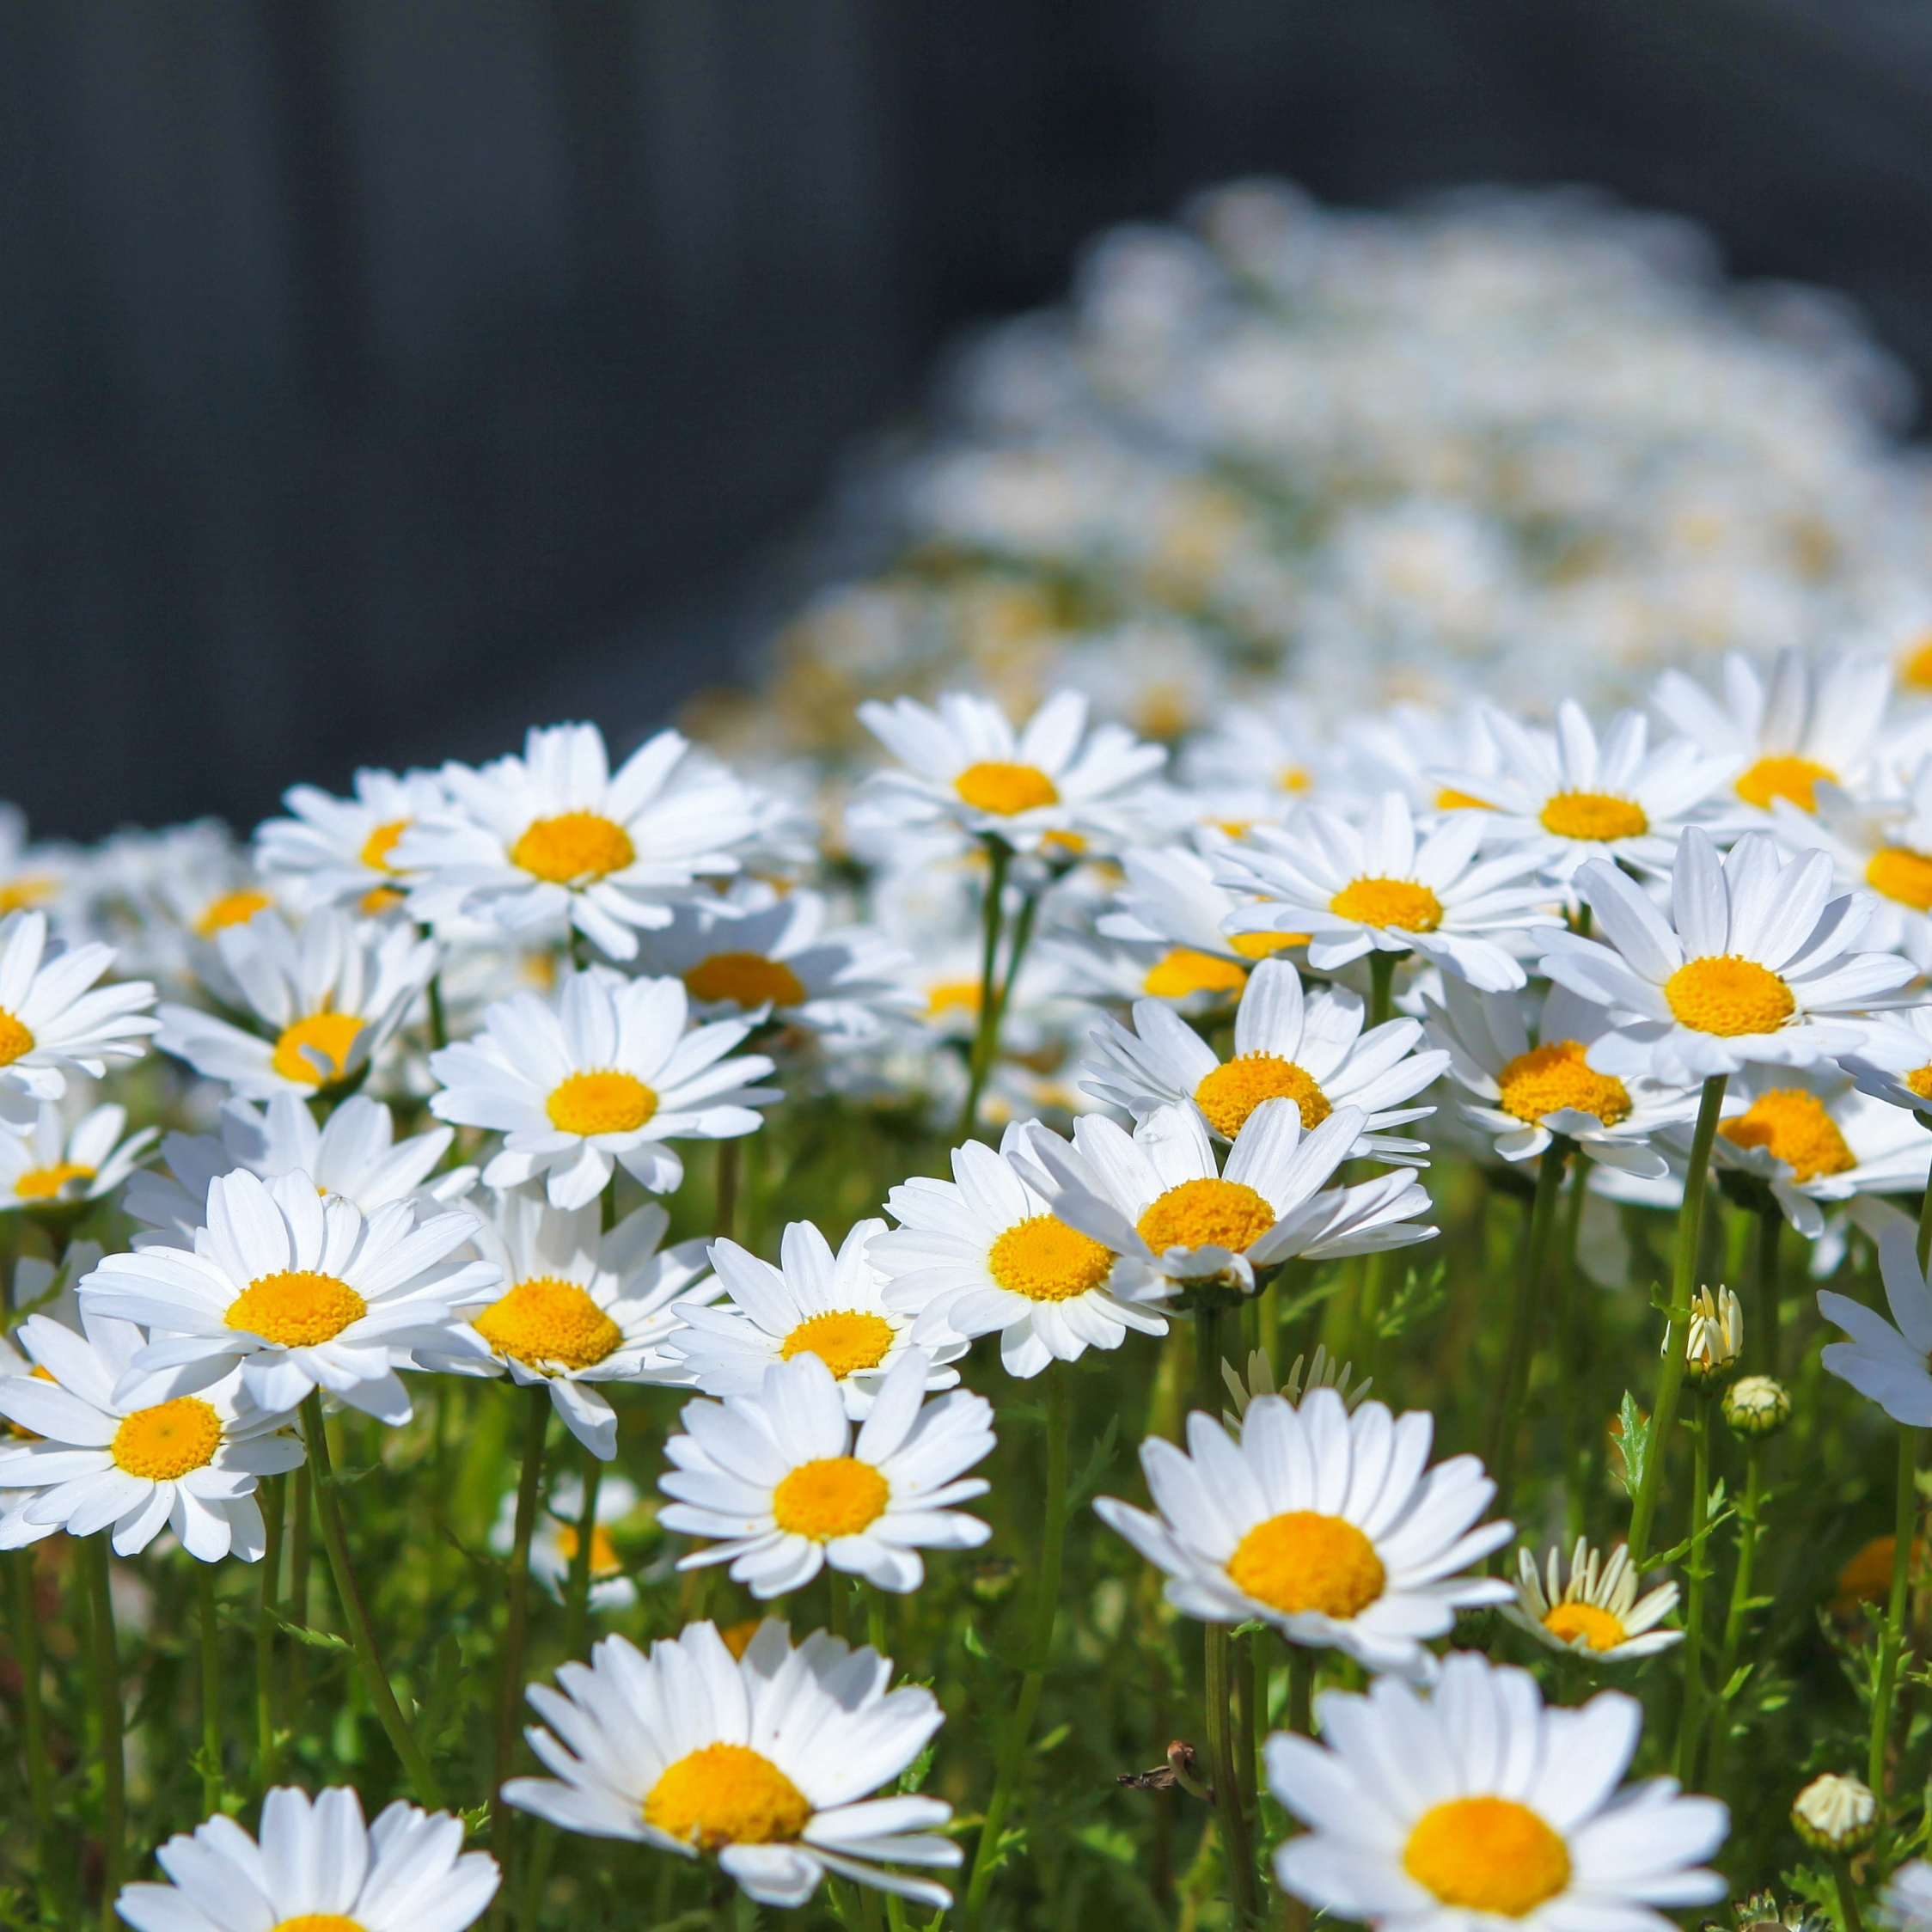 Meadow, spring, flowers, white daisy, 2248x2248 wallpaper